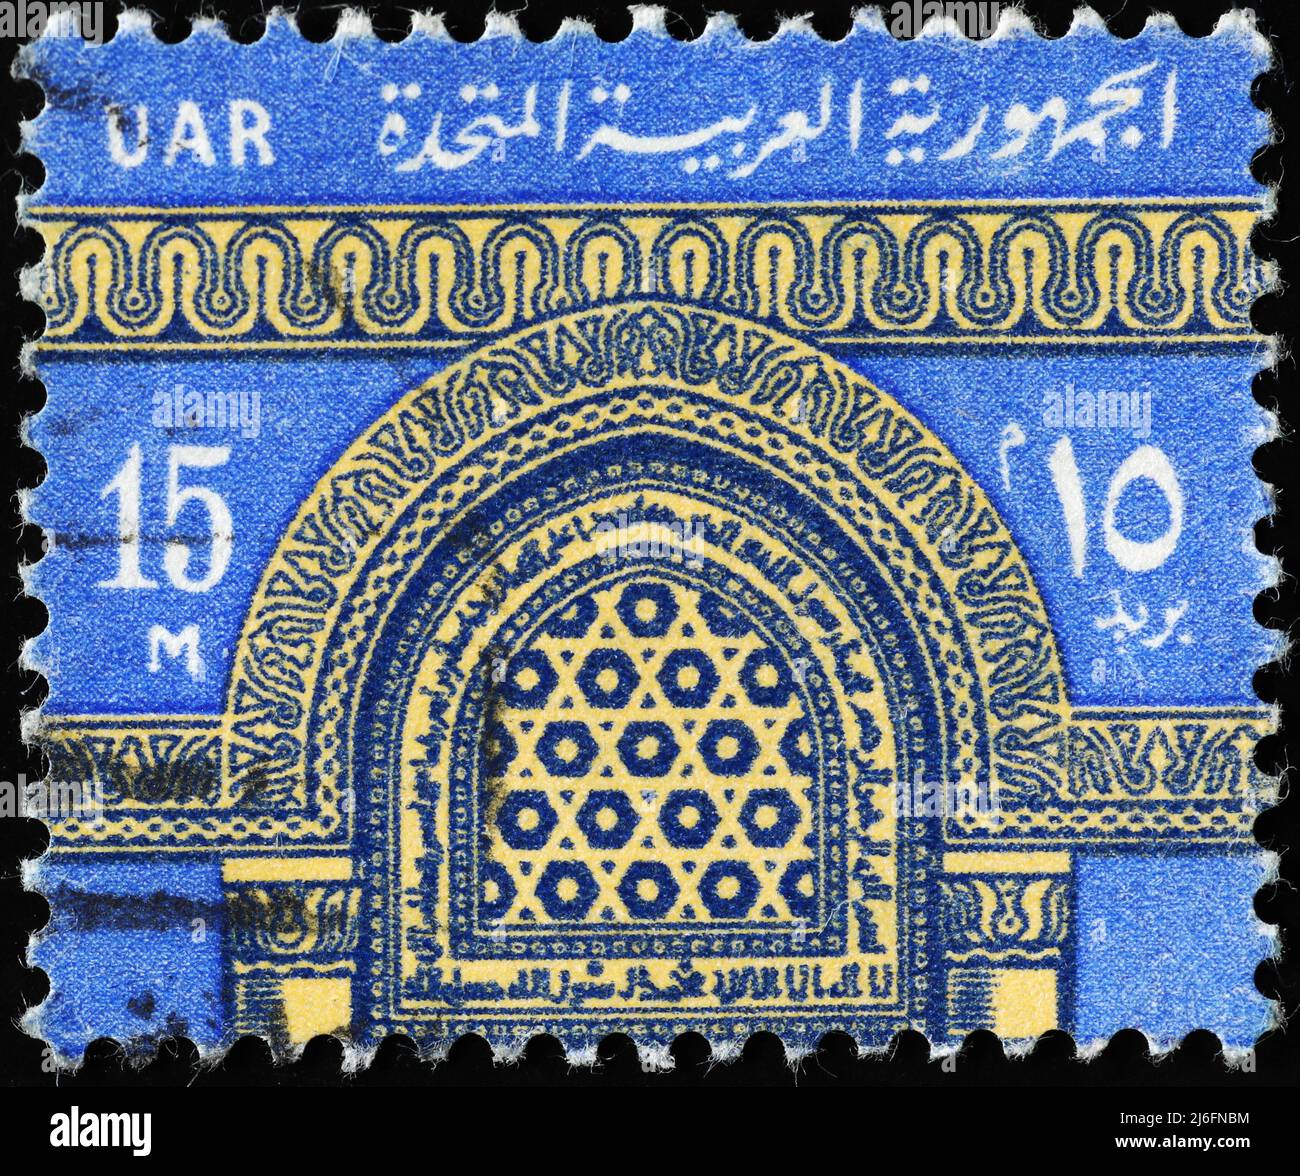 Arab architectural details on postage stamp Stock Photo